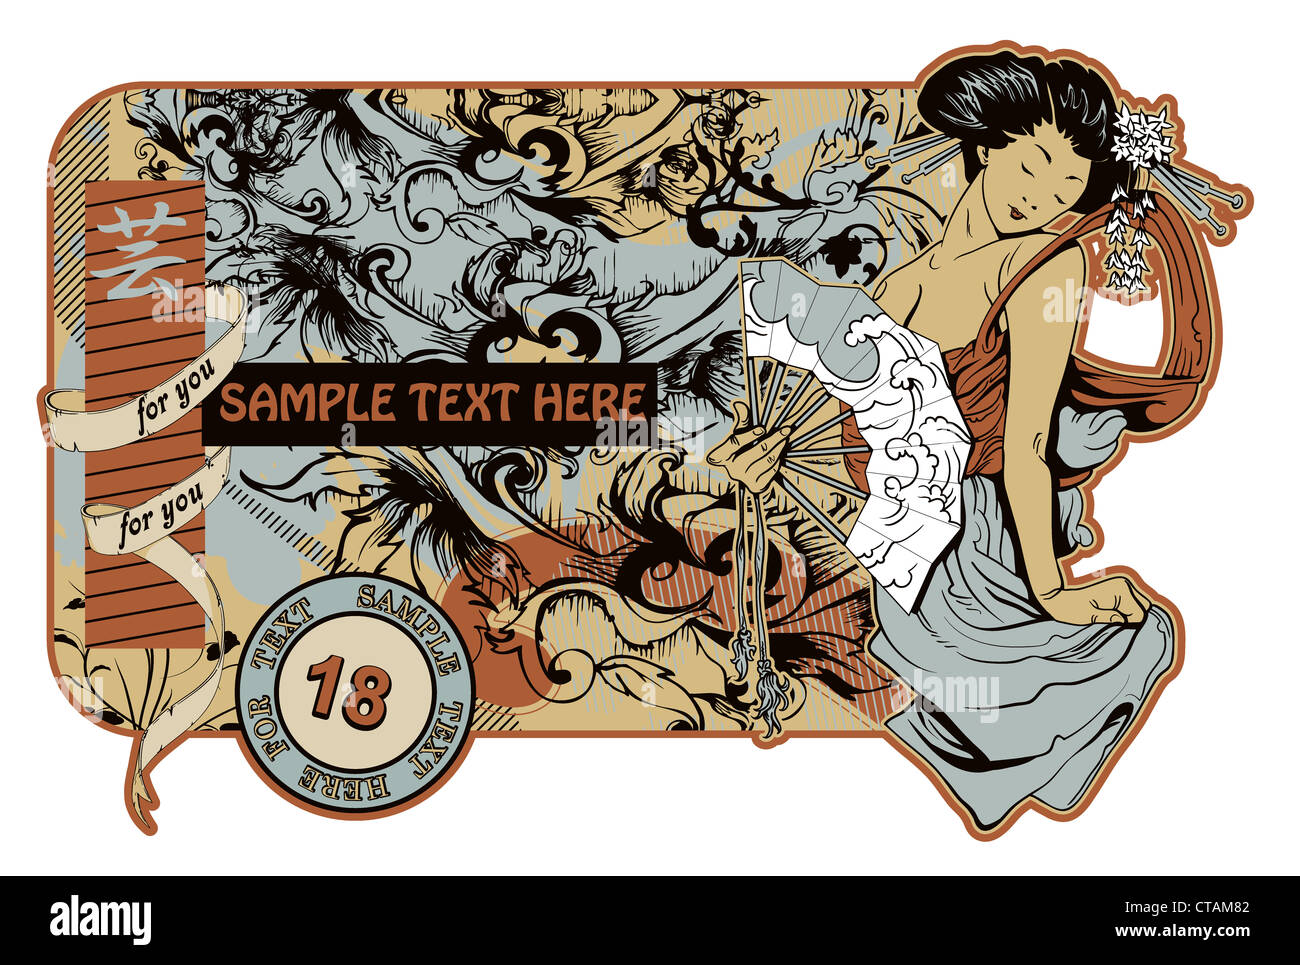 vector vintage japanese label with geisha Stock Photo. 